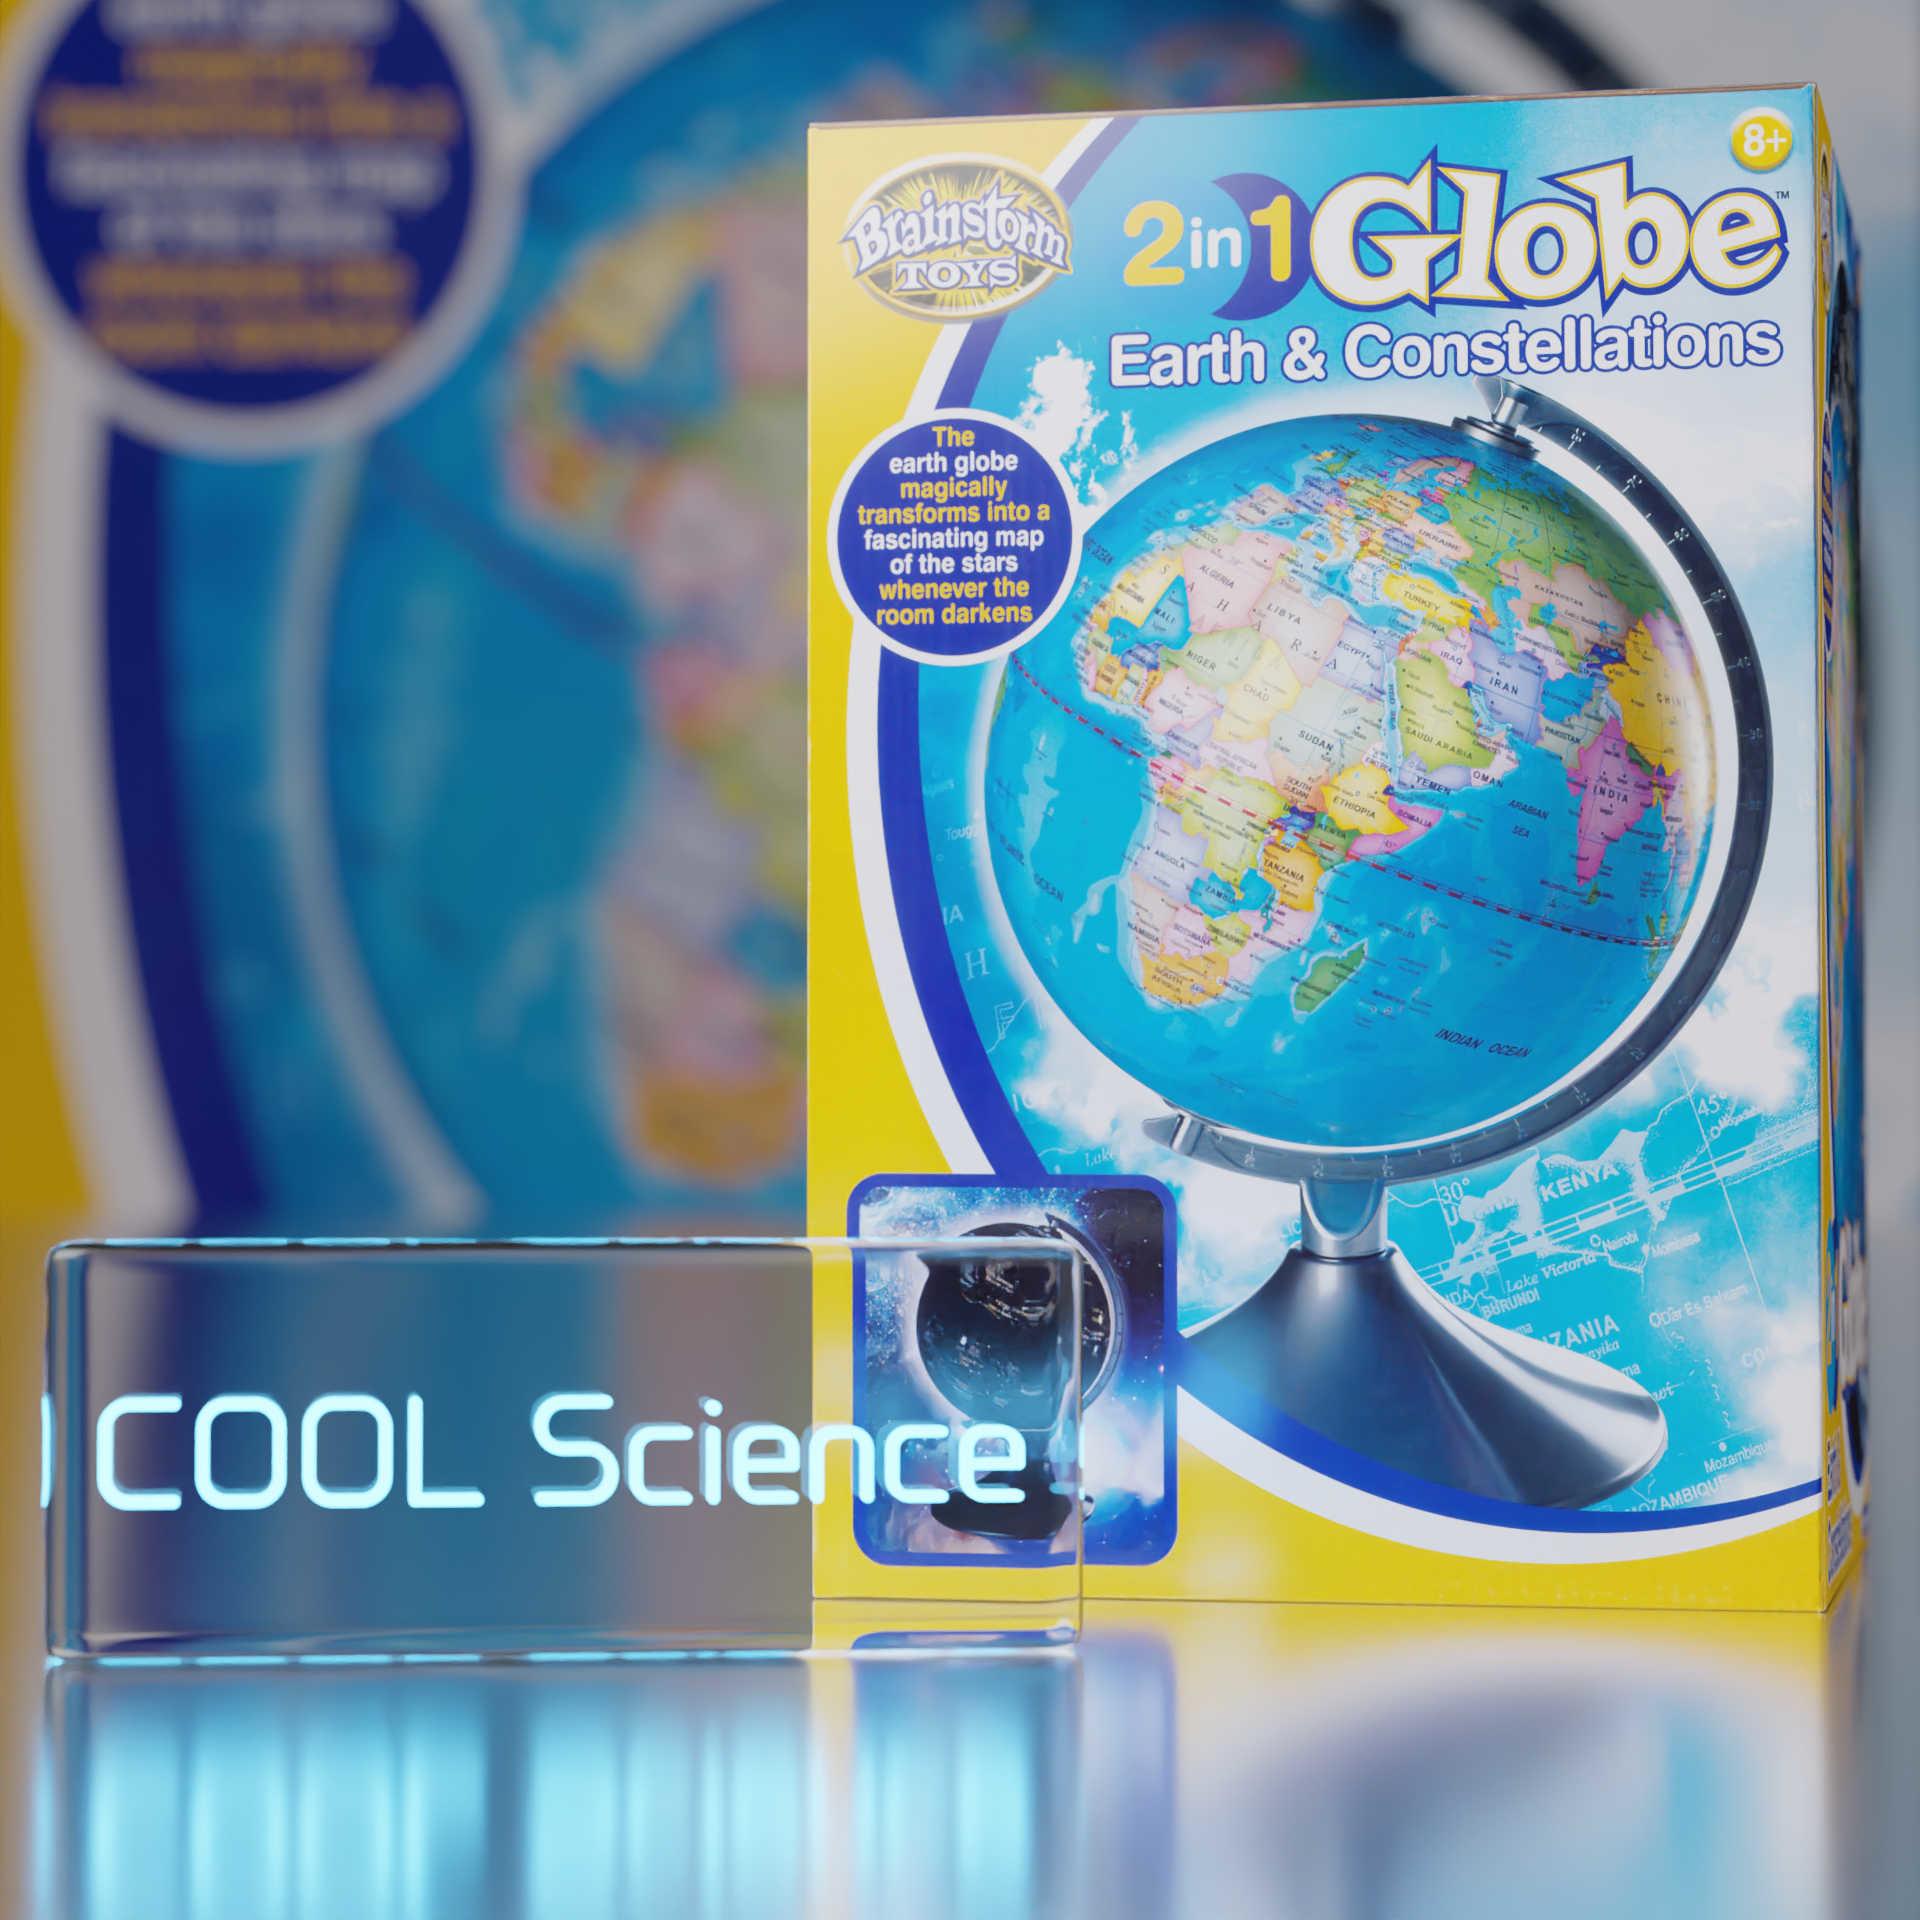 Left Side View of the Brainstorm Toys 2 in 1 Globe Earth & Constellations box shows a picture of the Globe earth map